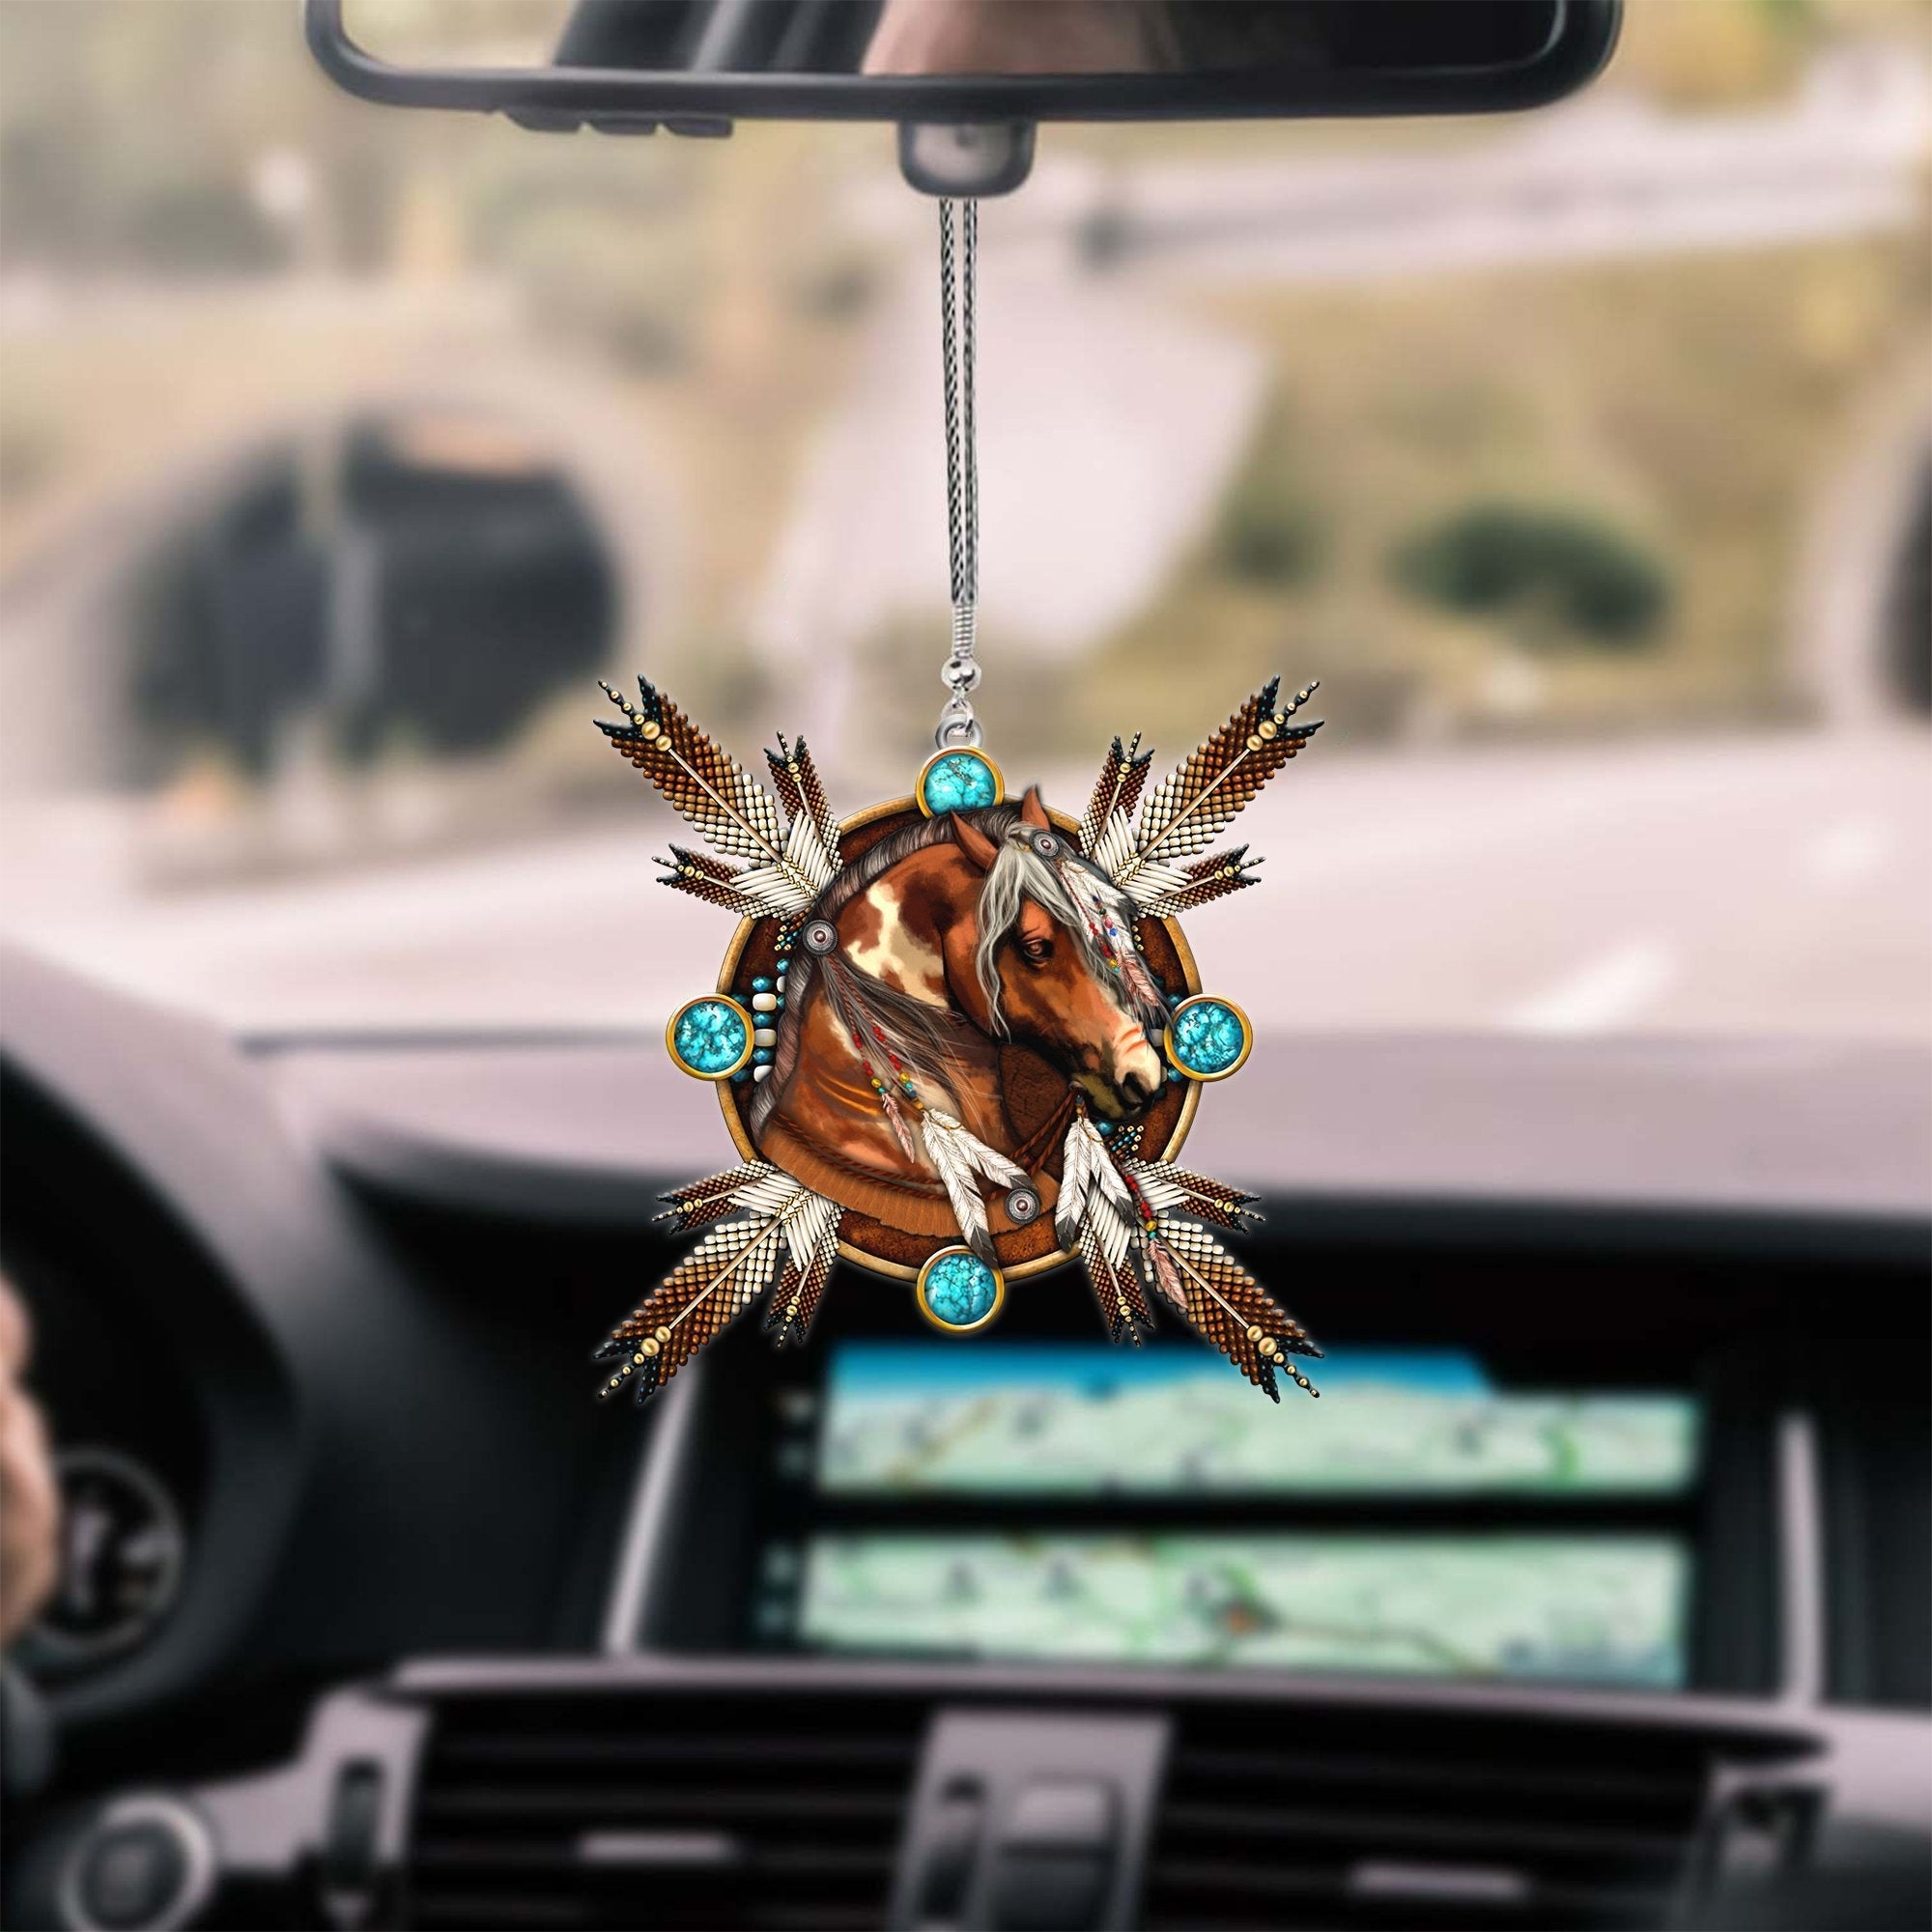 Native American Car Hanging Ornament/ Interior Gift For New Car